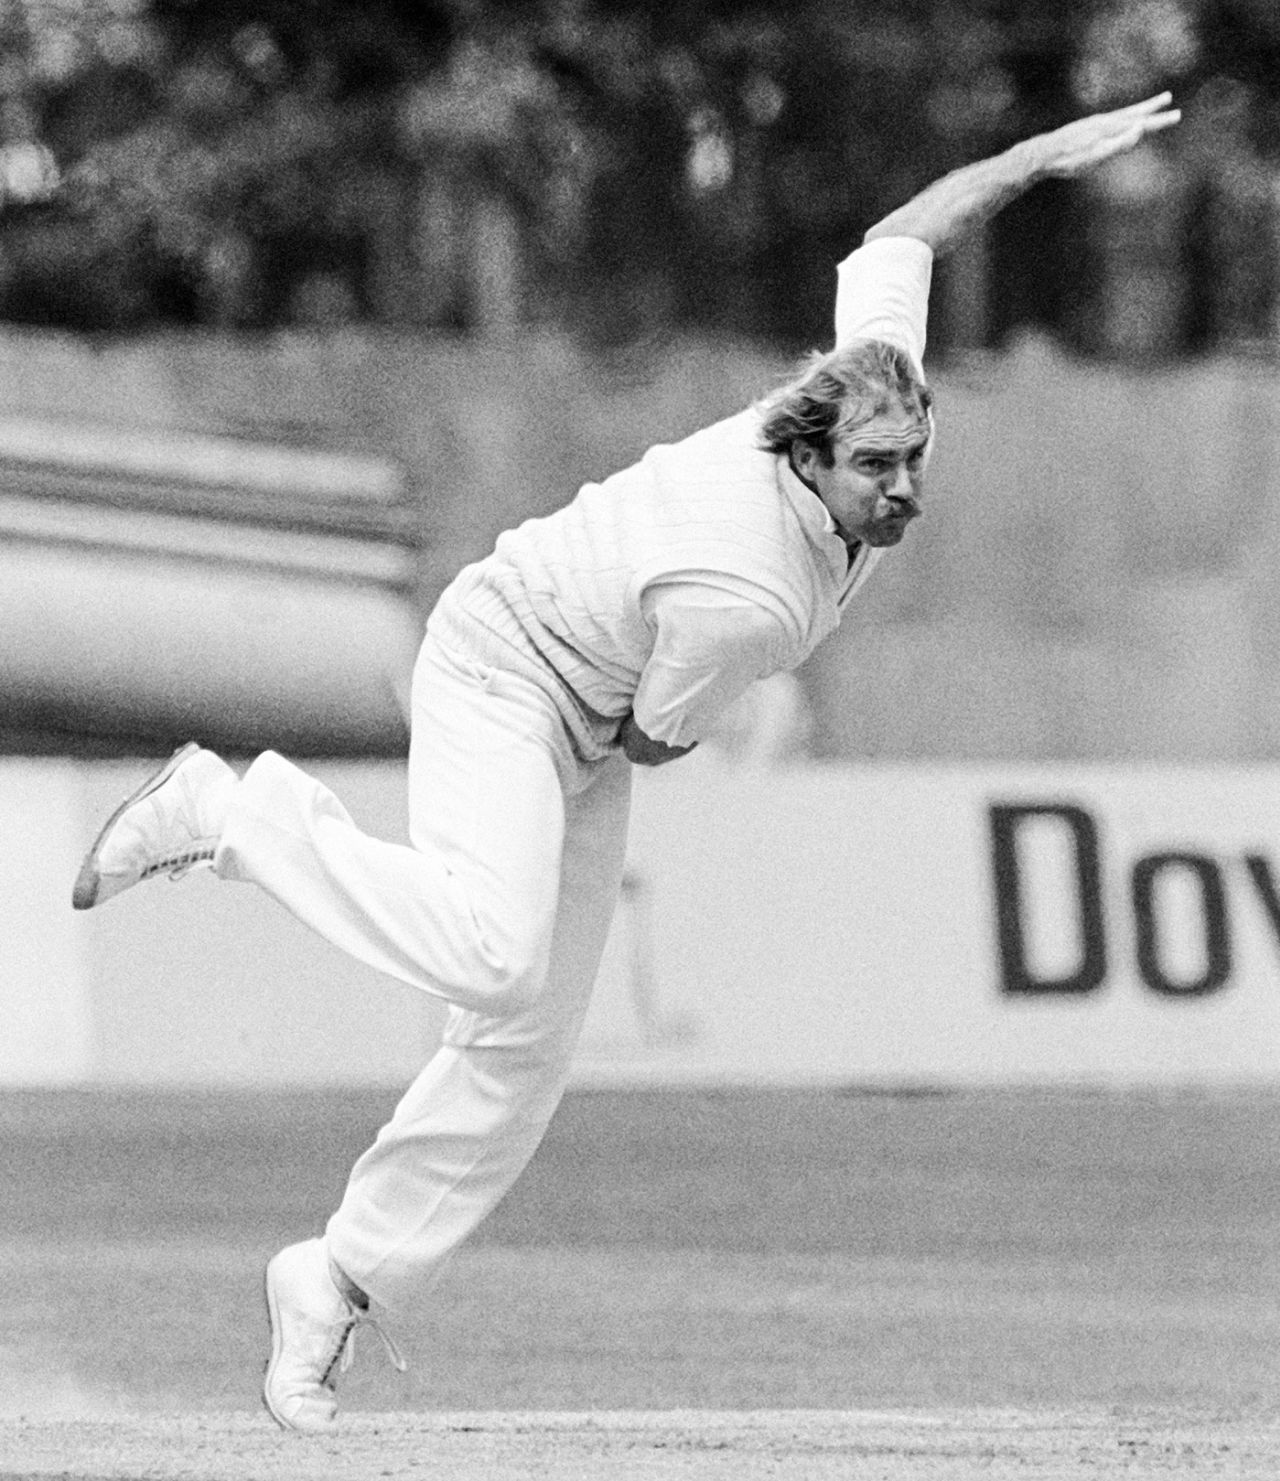 Garth le Roux bowls for Sussex, Kent v Sussex, County Championship, Dartford, 3rd day, May 22, 1987